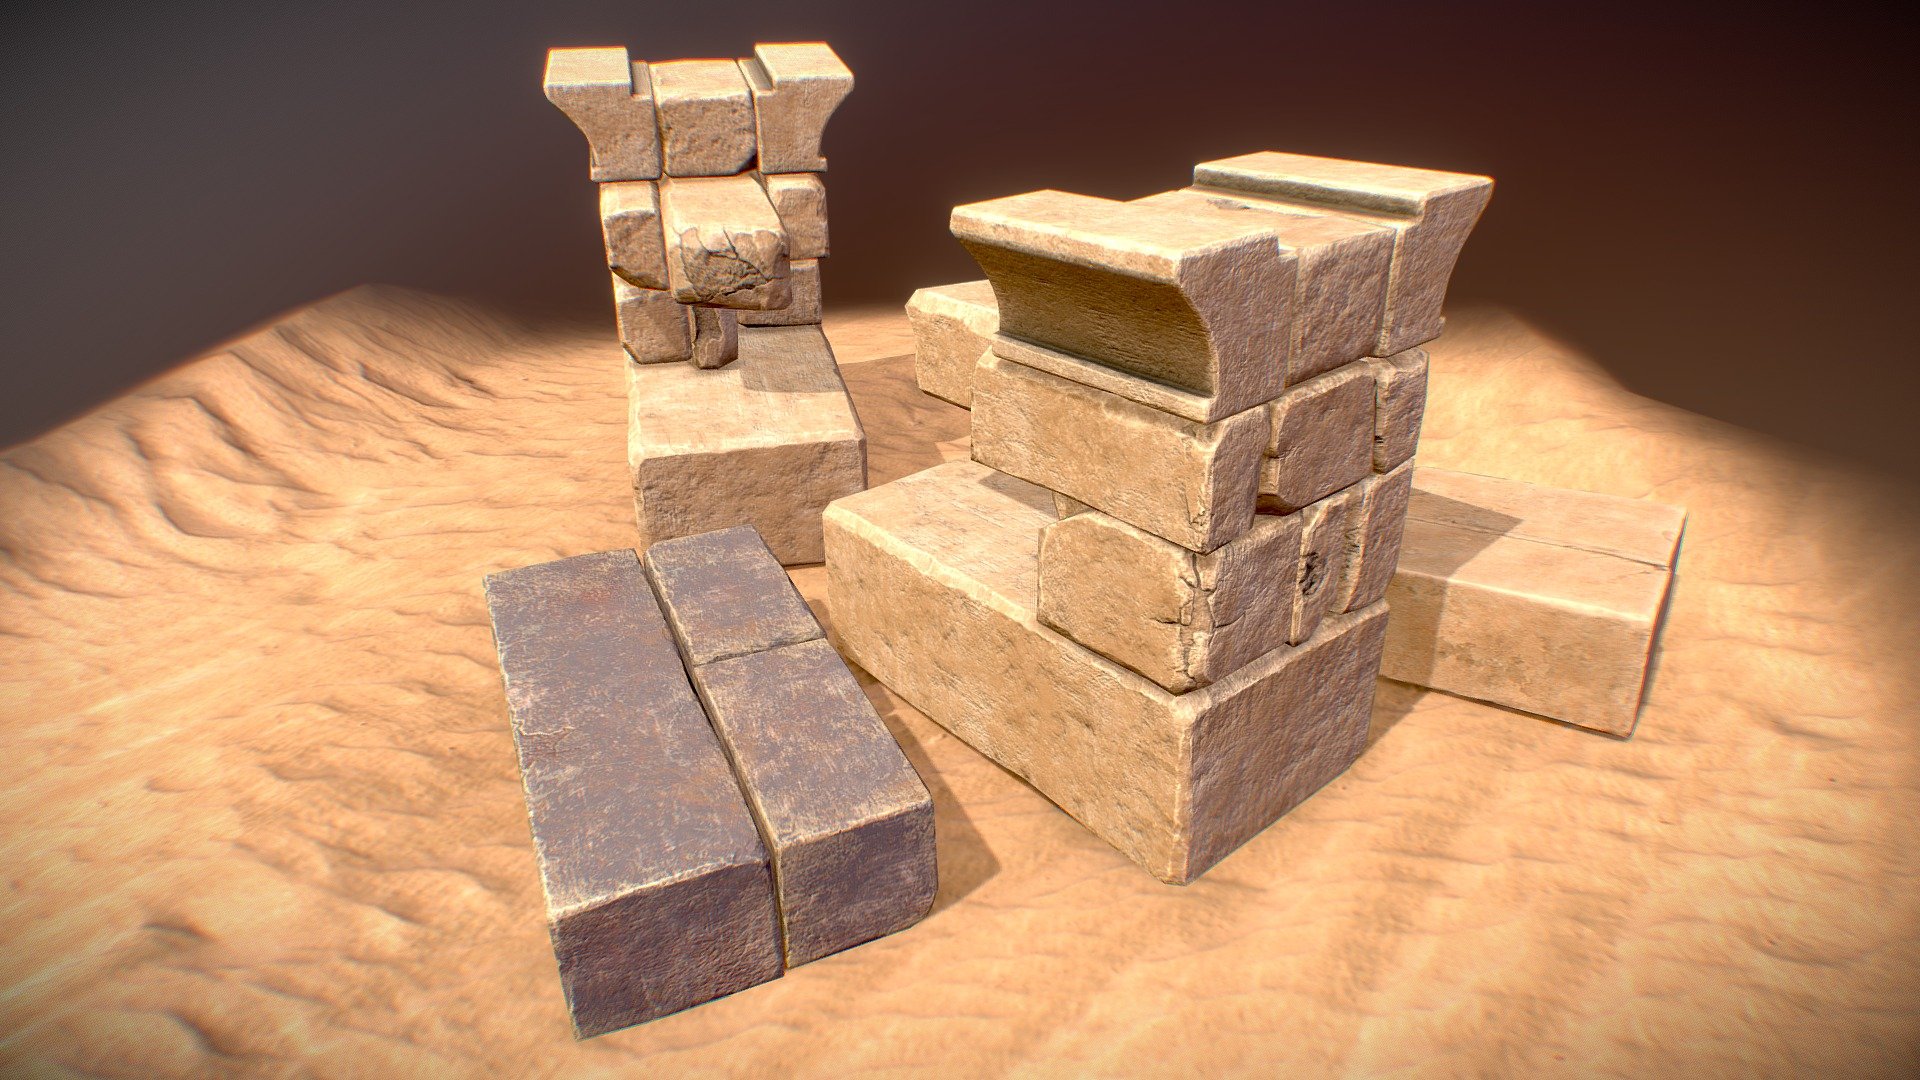 Some modular pieces that I made for a large desert environment in Unreal.

Textures are in 2K/4K and using the .png format.

The additonal file includes the ZBrush projects containing the high and low poly models.

For more about this project: ArtStation - Ancient Sandstone Bricks - Buy Royalty Free 3D model by Emiel (@Emiel97) 3d model